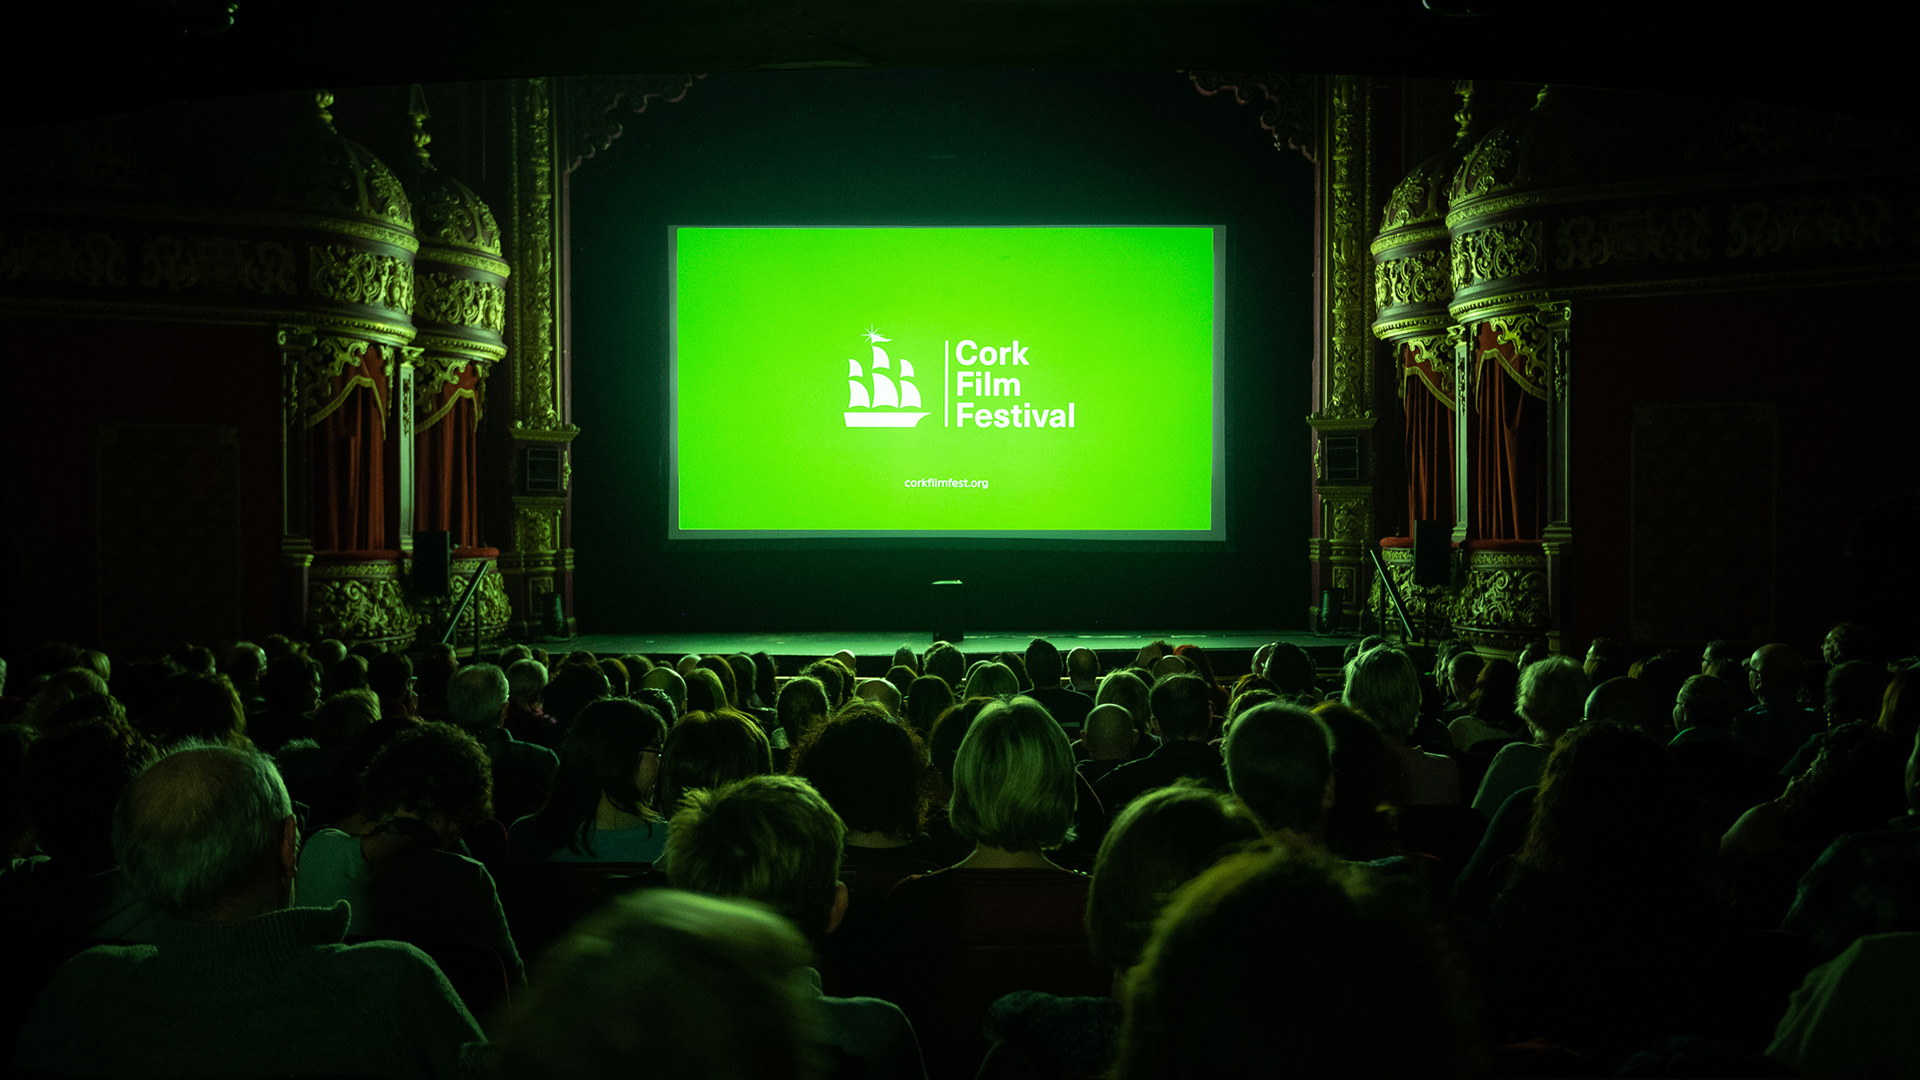 Audience in theater watching screen displaying Cork Film Festival